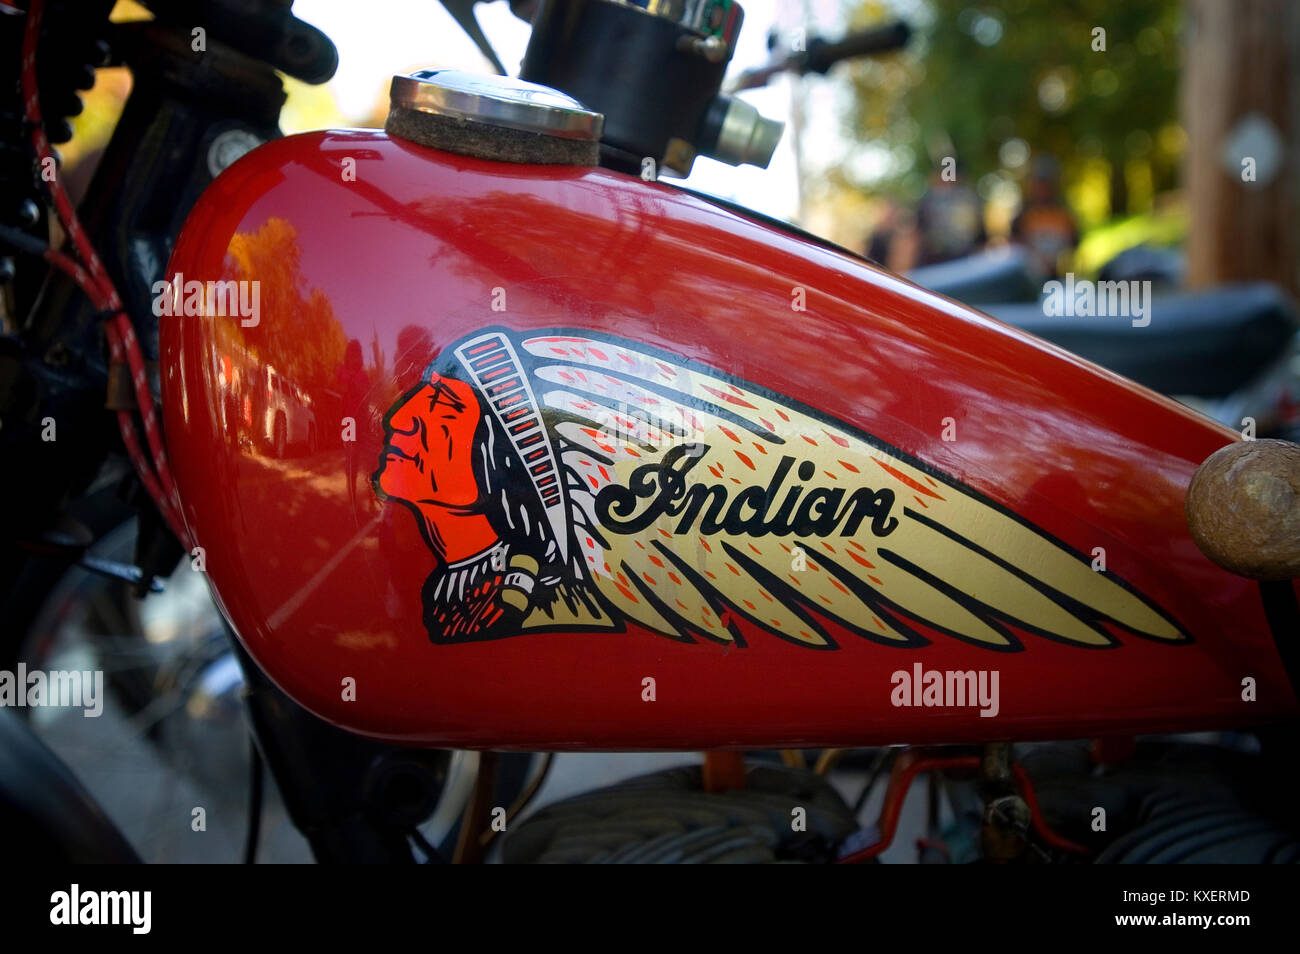 The side (fuel tank) and logo of a 1934 Indian Motorcycle.   Photographed in Barnstable, Massachusetts on Cape Cod, USA Stock Photo